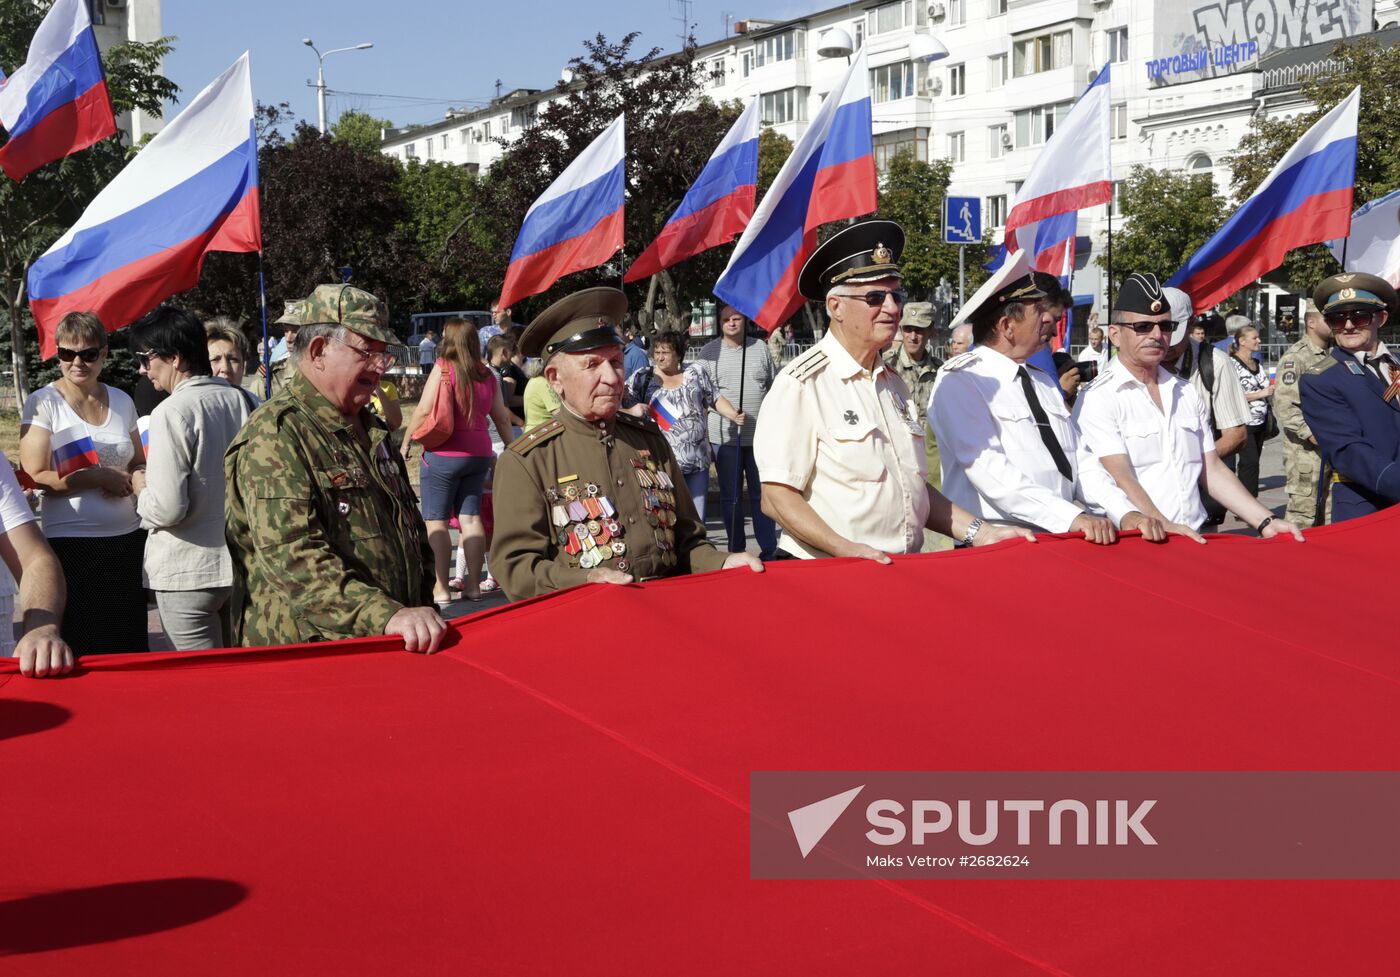 National Flag Day celebrations across Russia